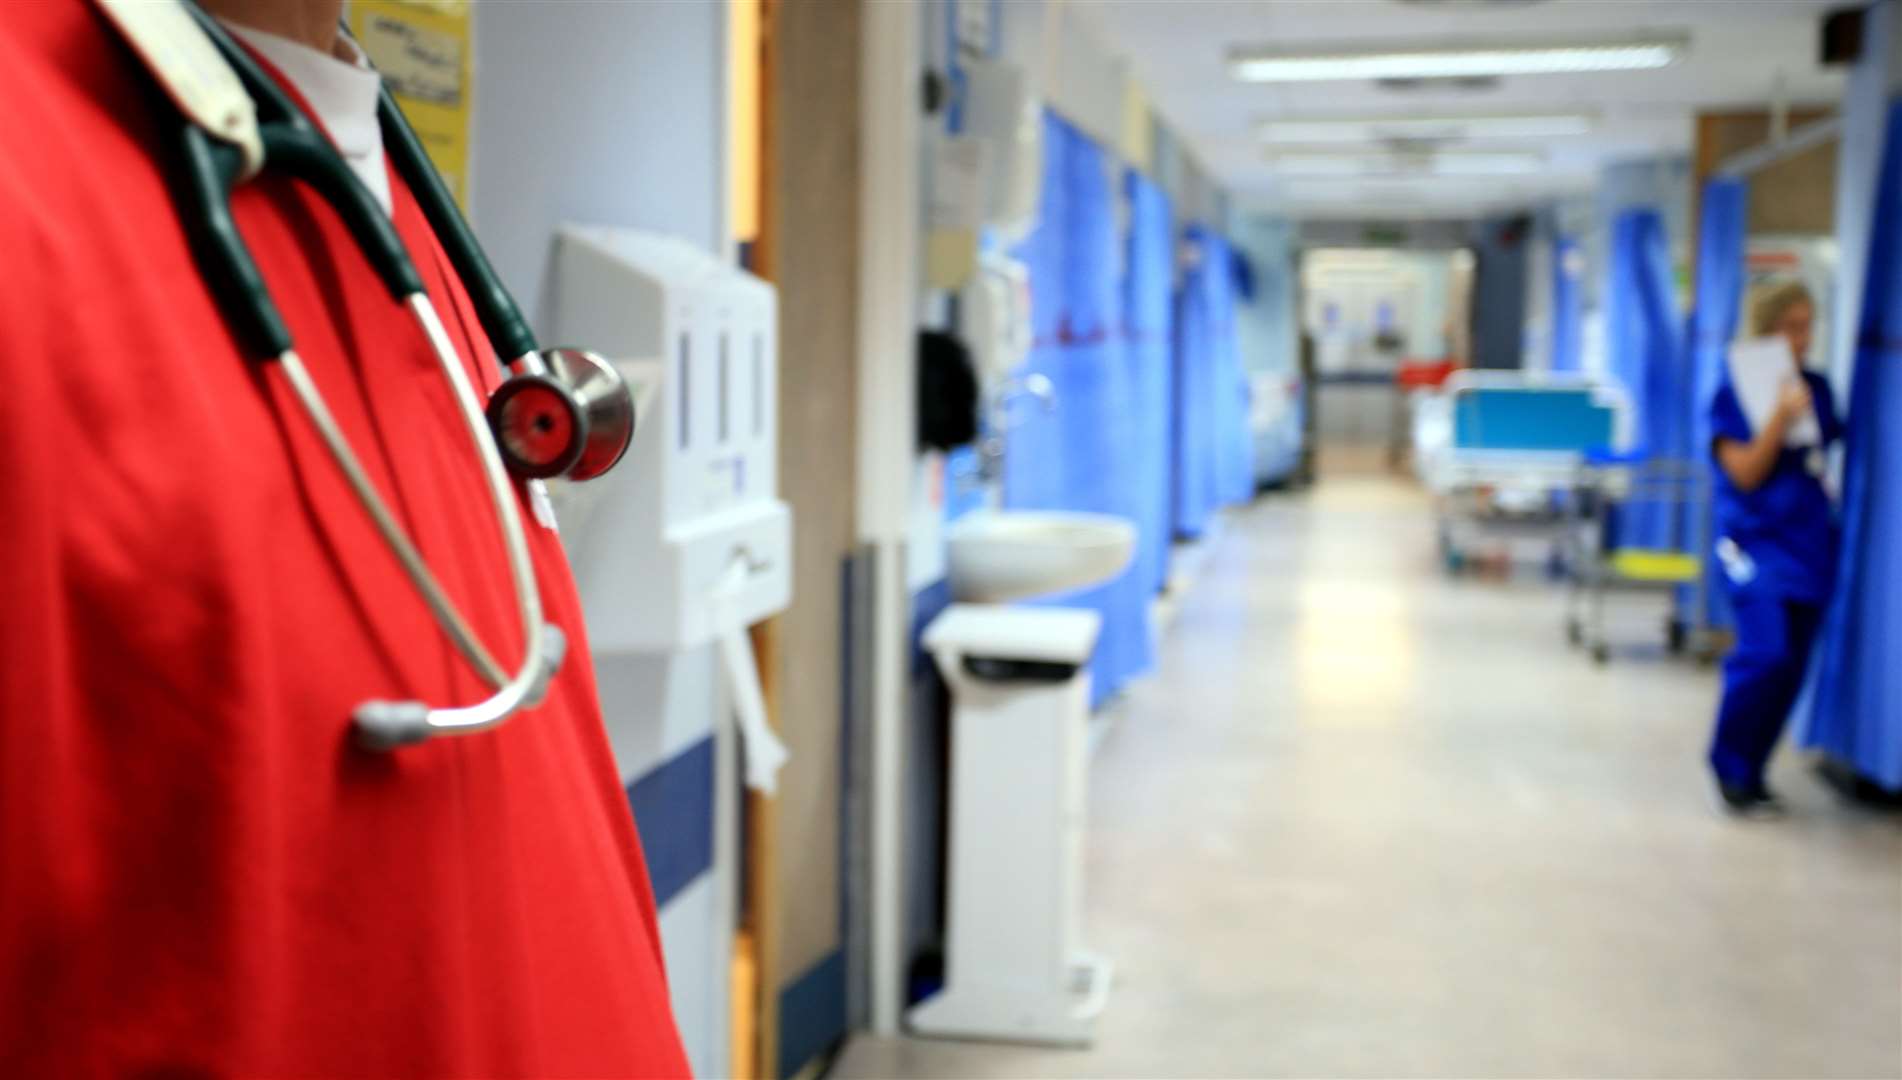 Maidstone and Tunbridge Wells NHS Trust is looking to recruit 350 nurses this year